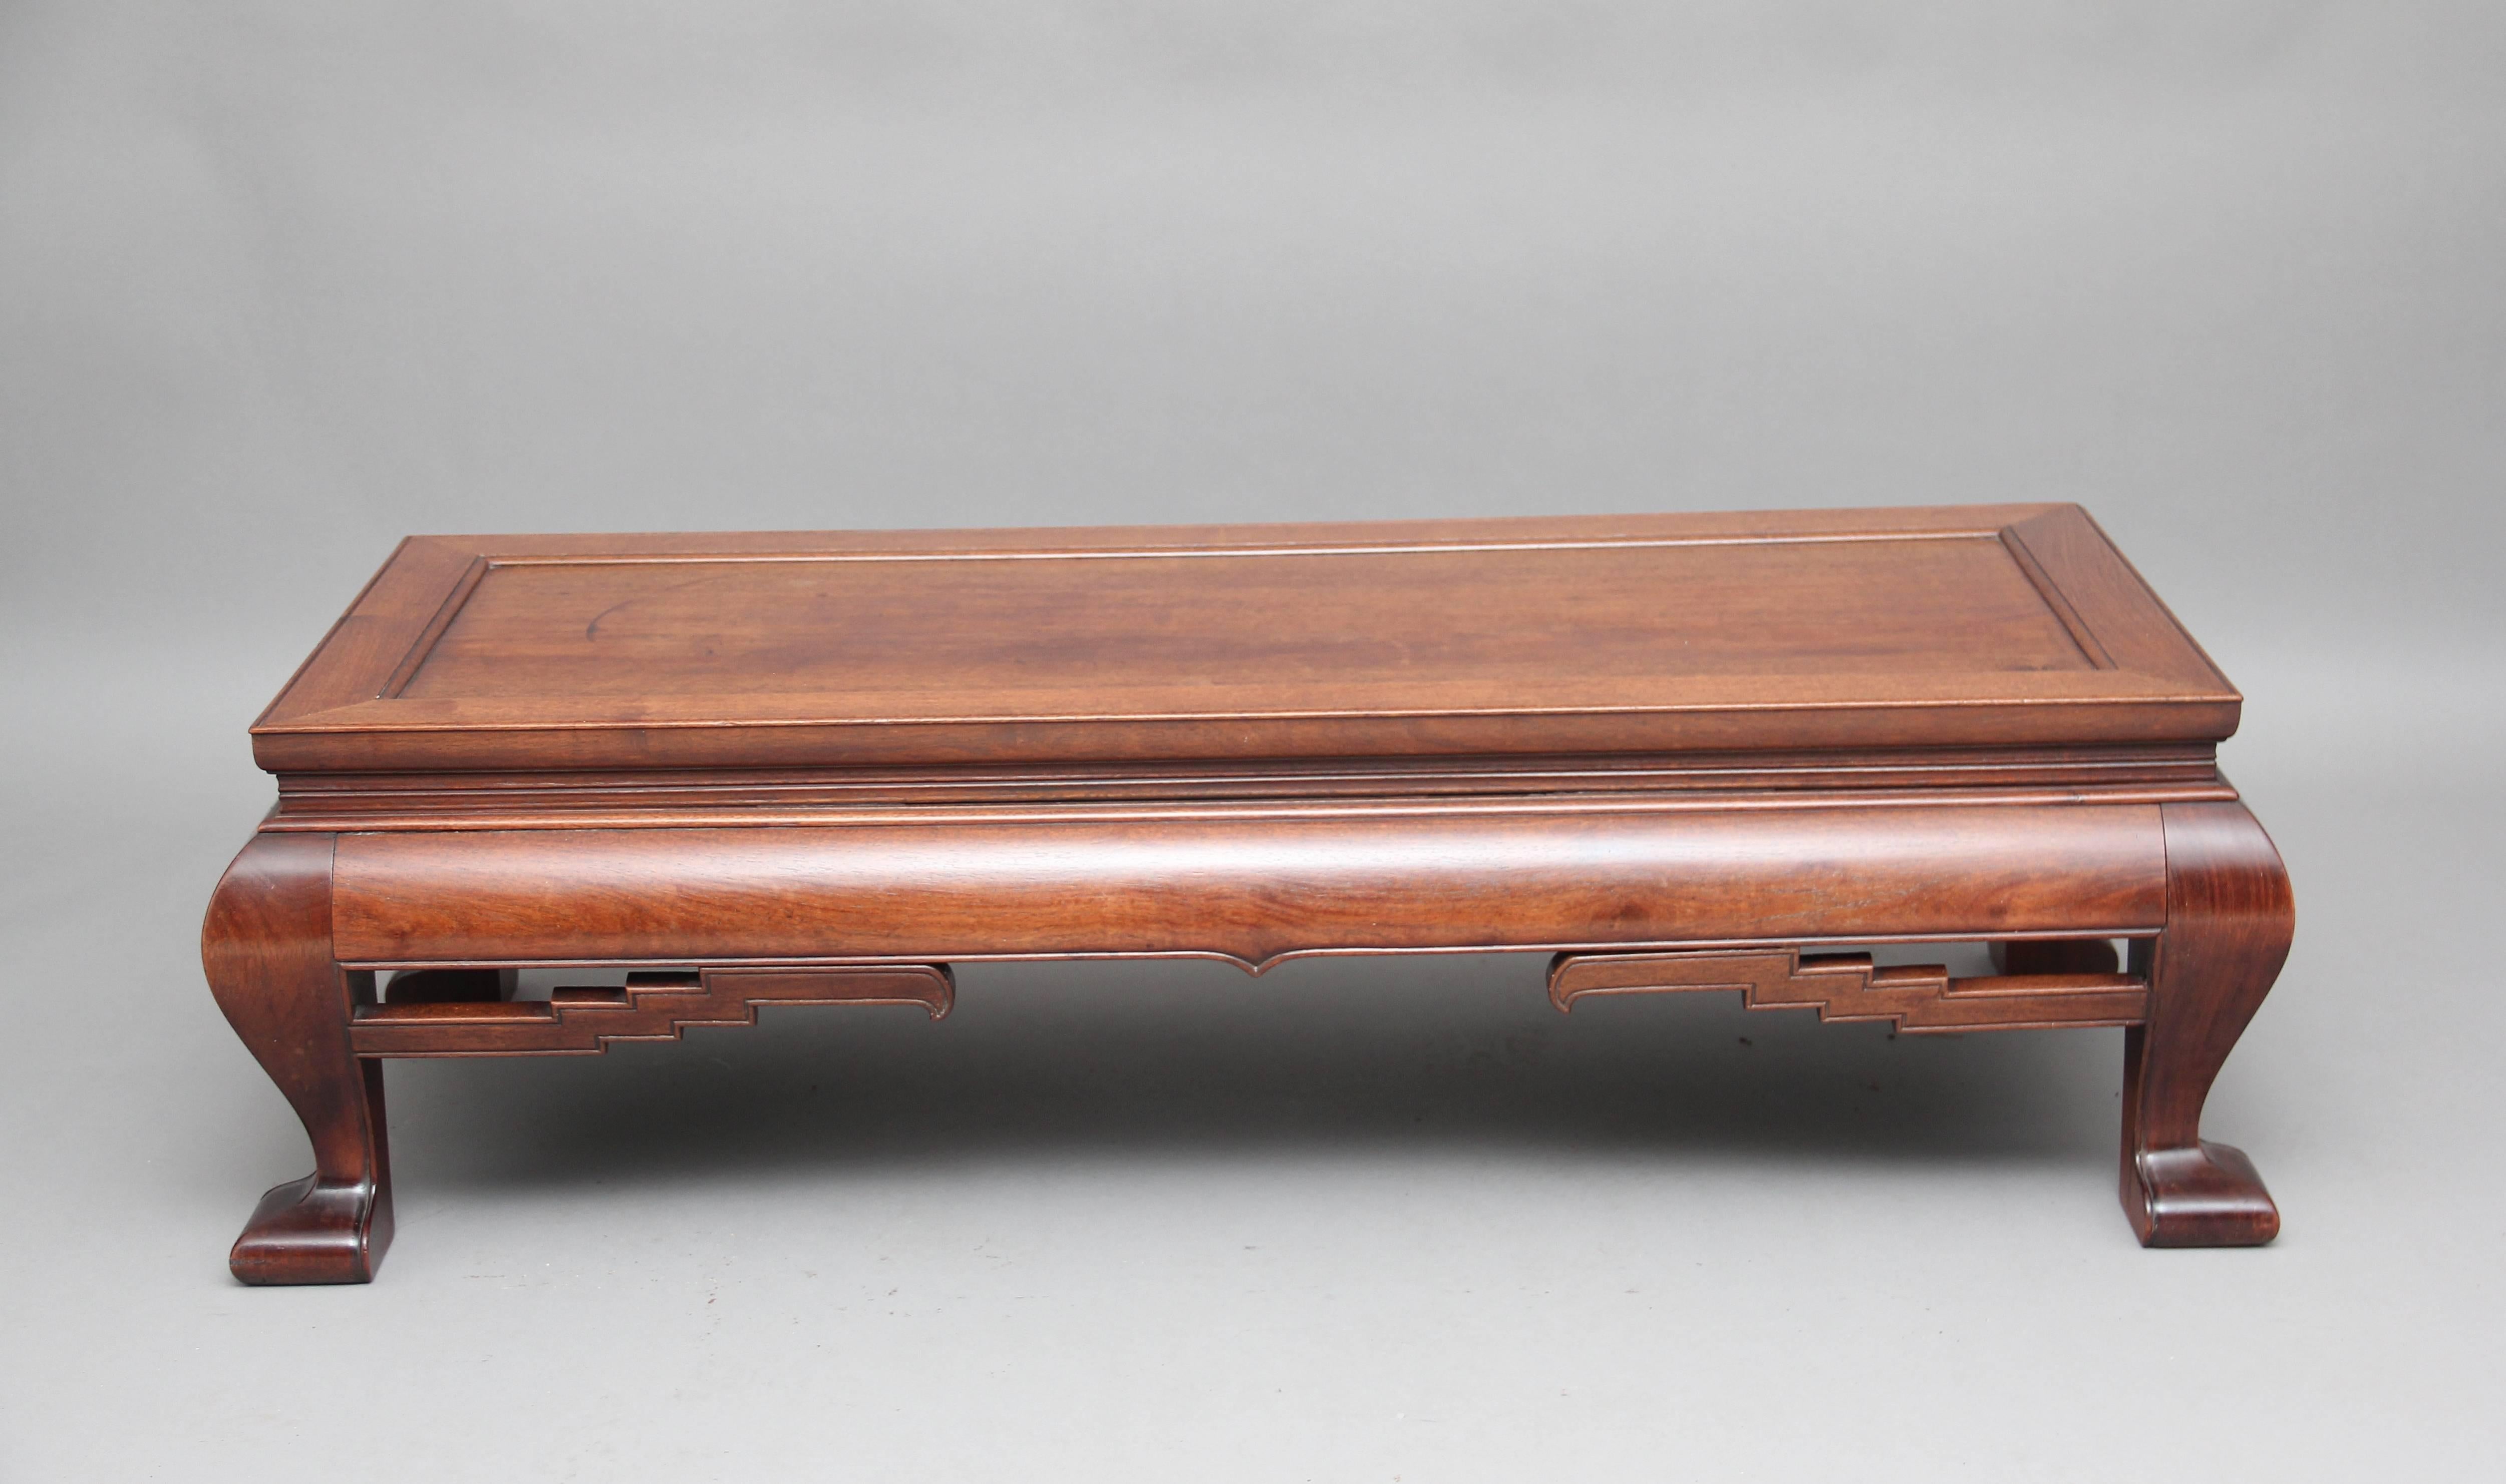 19th century Chinese hardwood coffee table, the stepped moulded rectangular top with a beaded edge frieze with carved fret decoration, supported on squat cabriole legs, circa 1890.